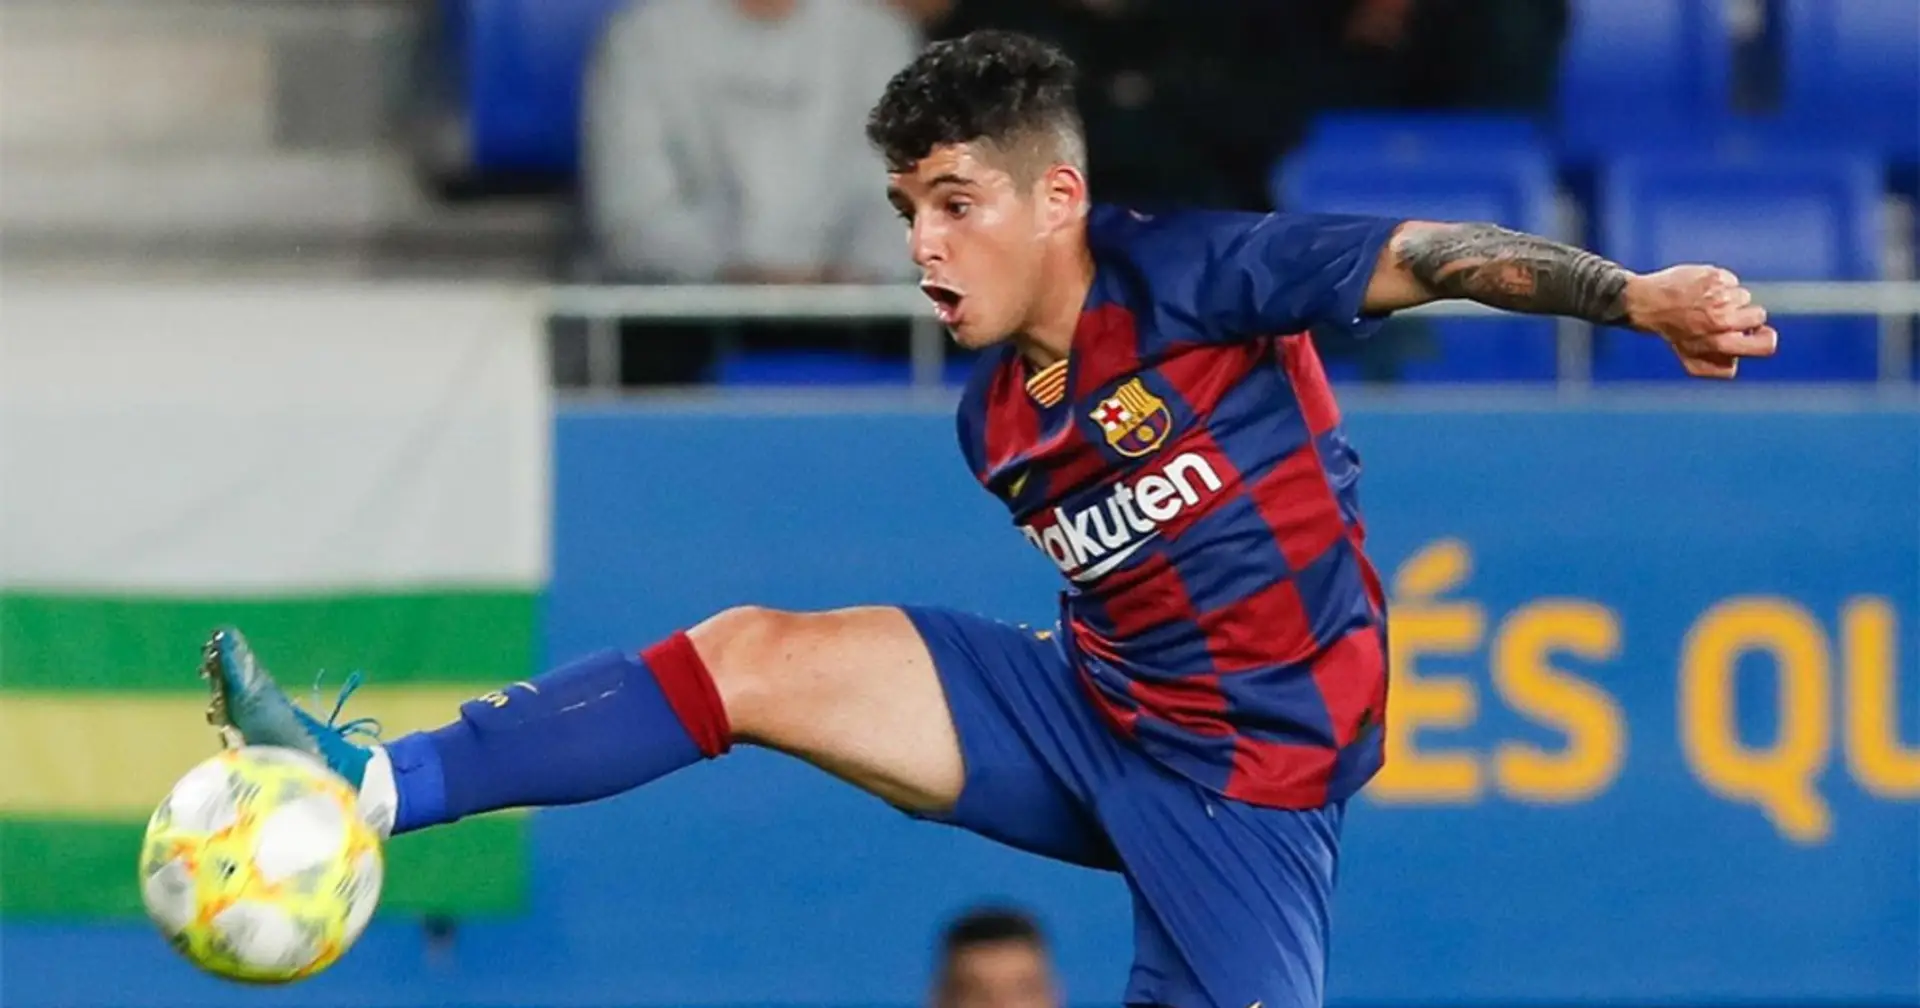 Barca B's Dani Morer names one thing that gives us advantage over promotion final rivals Sabadell